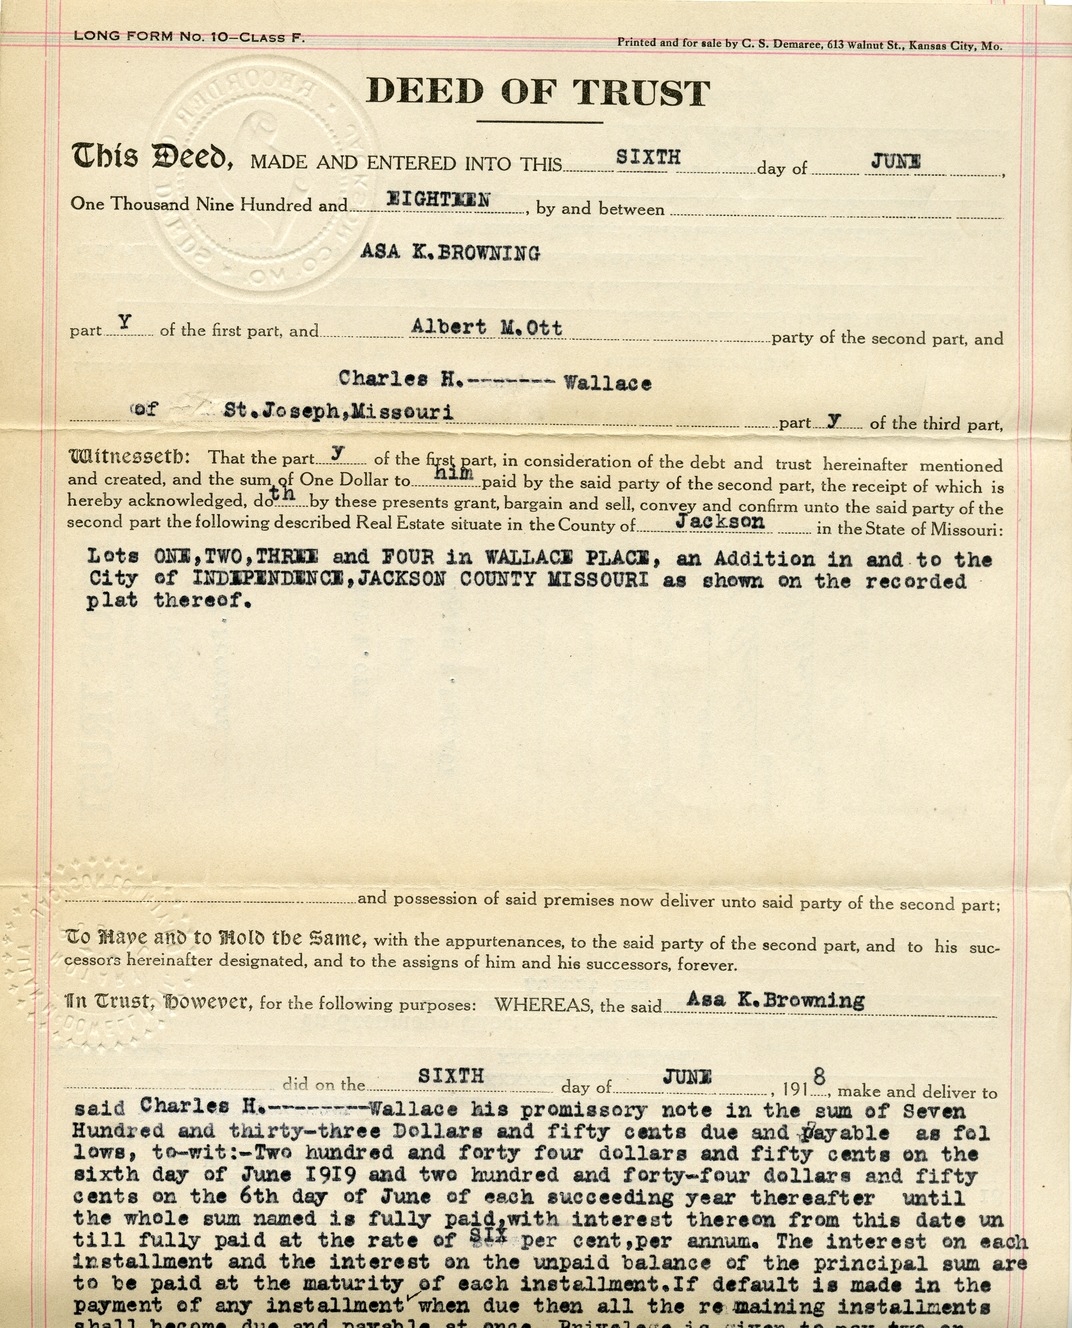 Deed of Trust from Asa K. Browning to Albert M. Ott for Charles H. Wallace